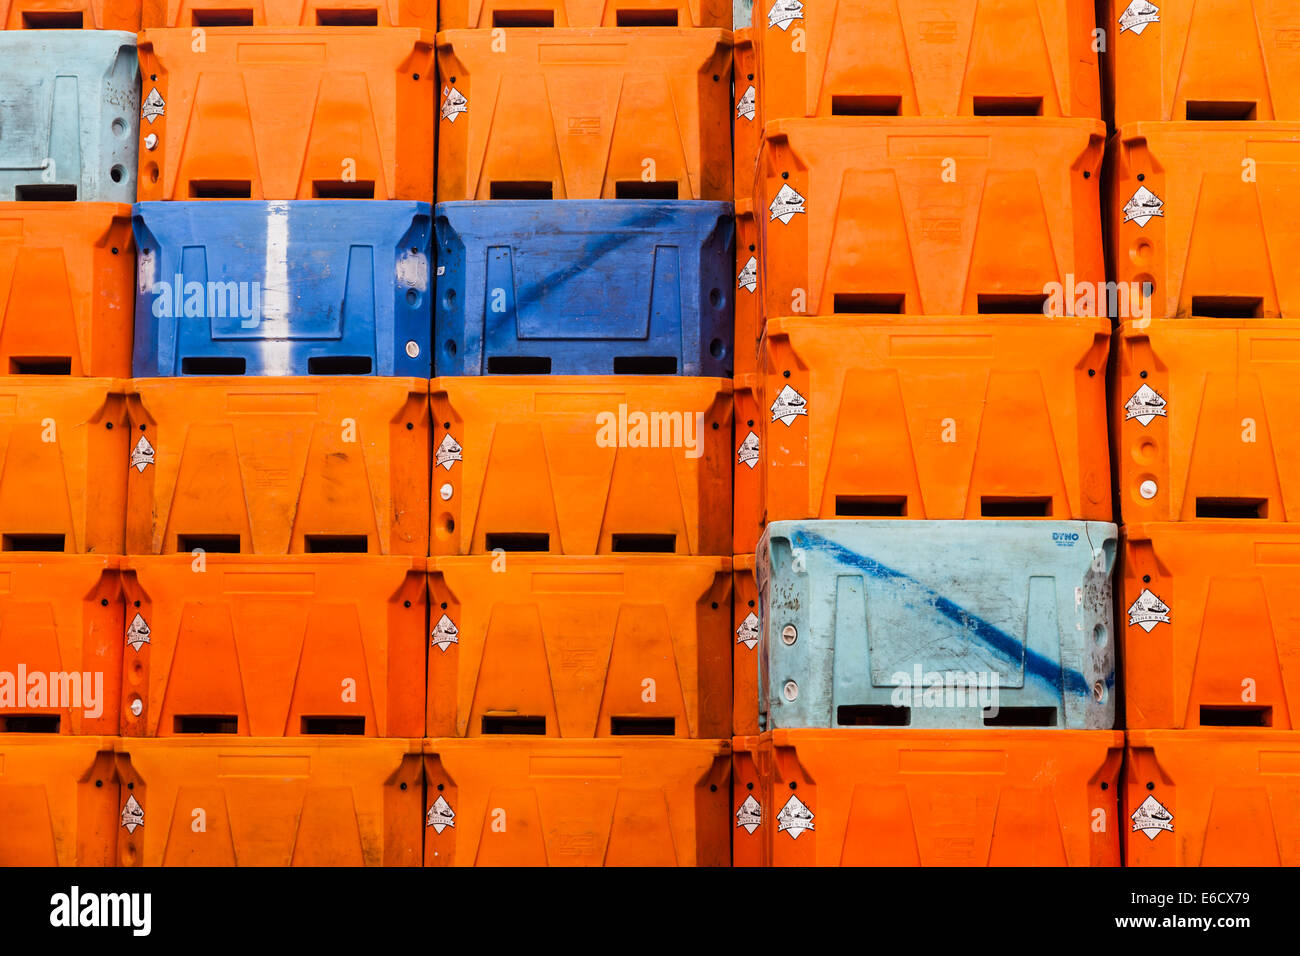 Abstract image of orange fish containers at a fish packing factory in Vancouver, Canada Stock Photo